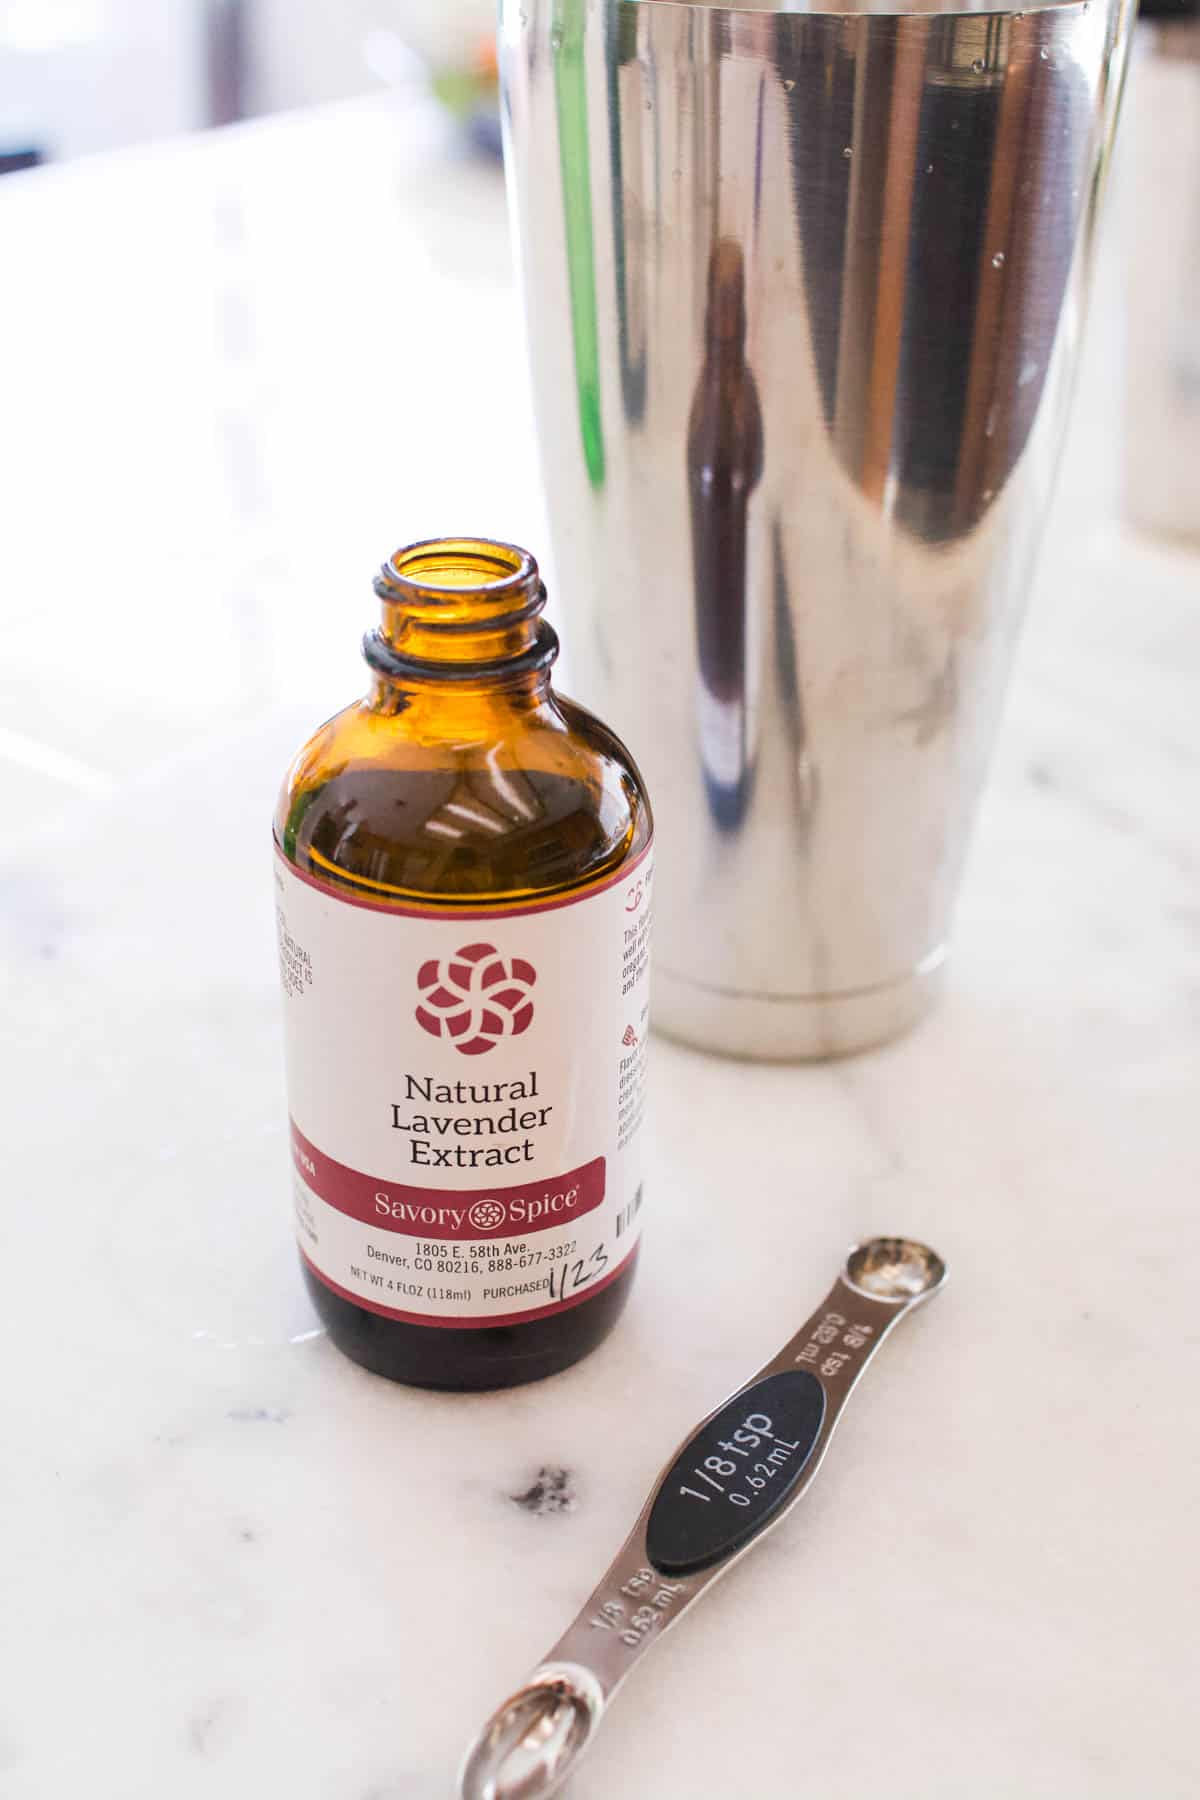 Bottle of lavender extract next to a cocktail shaker with a measuring spoon.